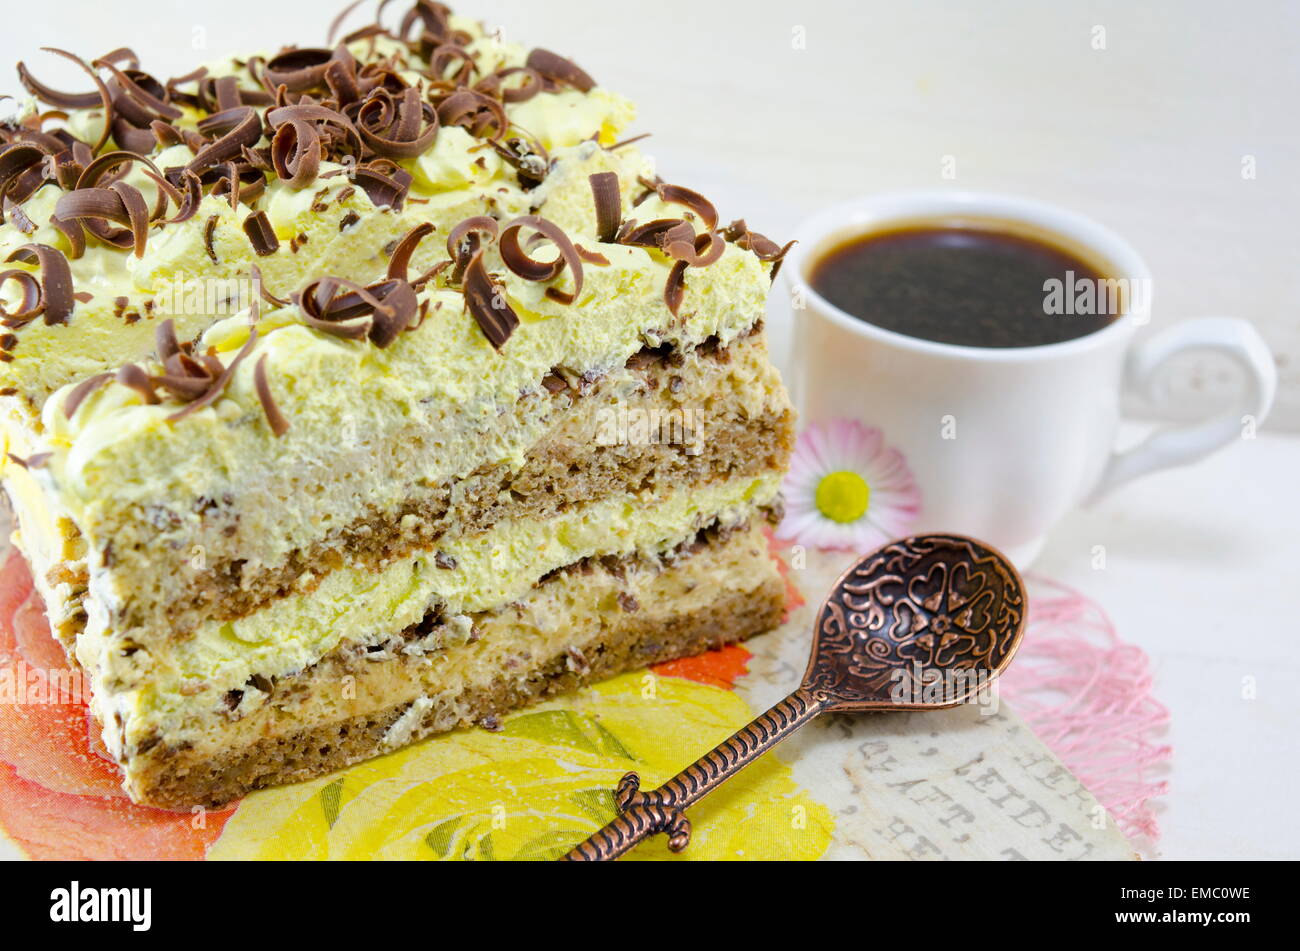 Cappuccino cake on a plate with a cup of coffee Stock Photo